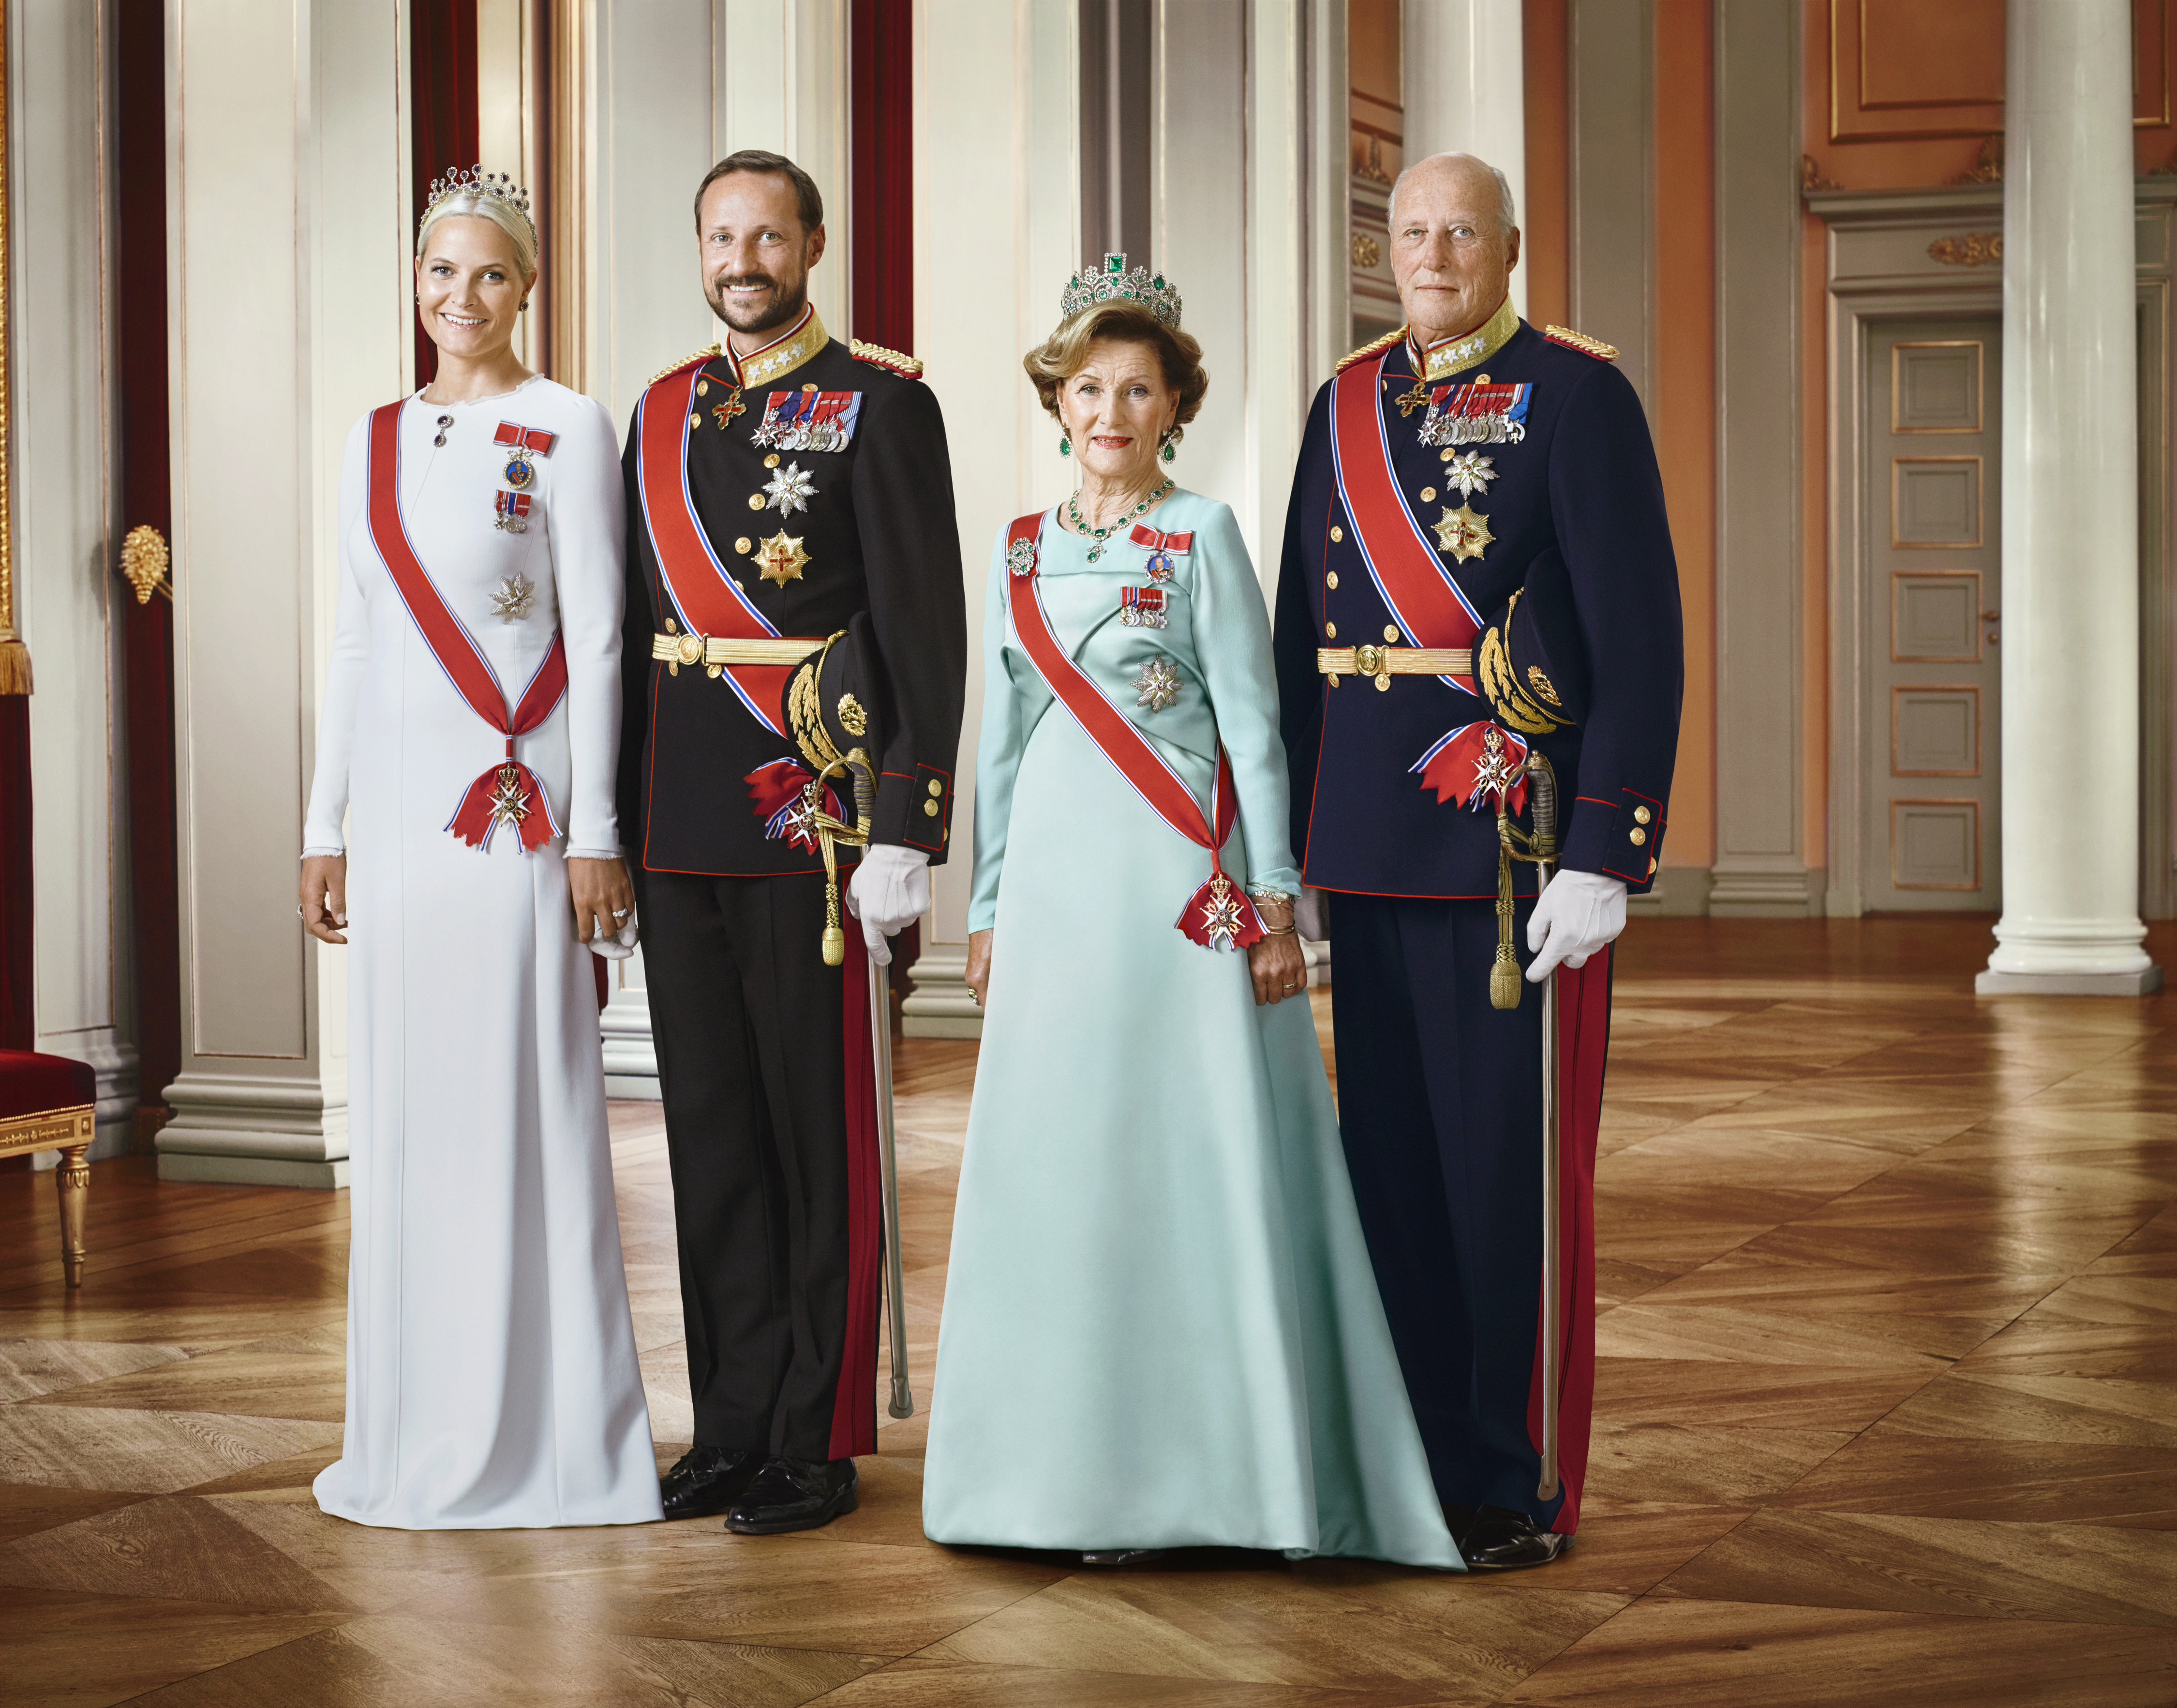 Details about   PC KING HARALD V CROWNPRINCE HAAKON MAGNUS IN UNIFORM OF NORWAY